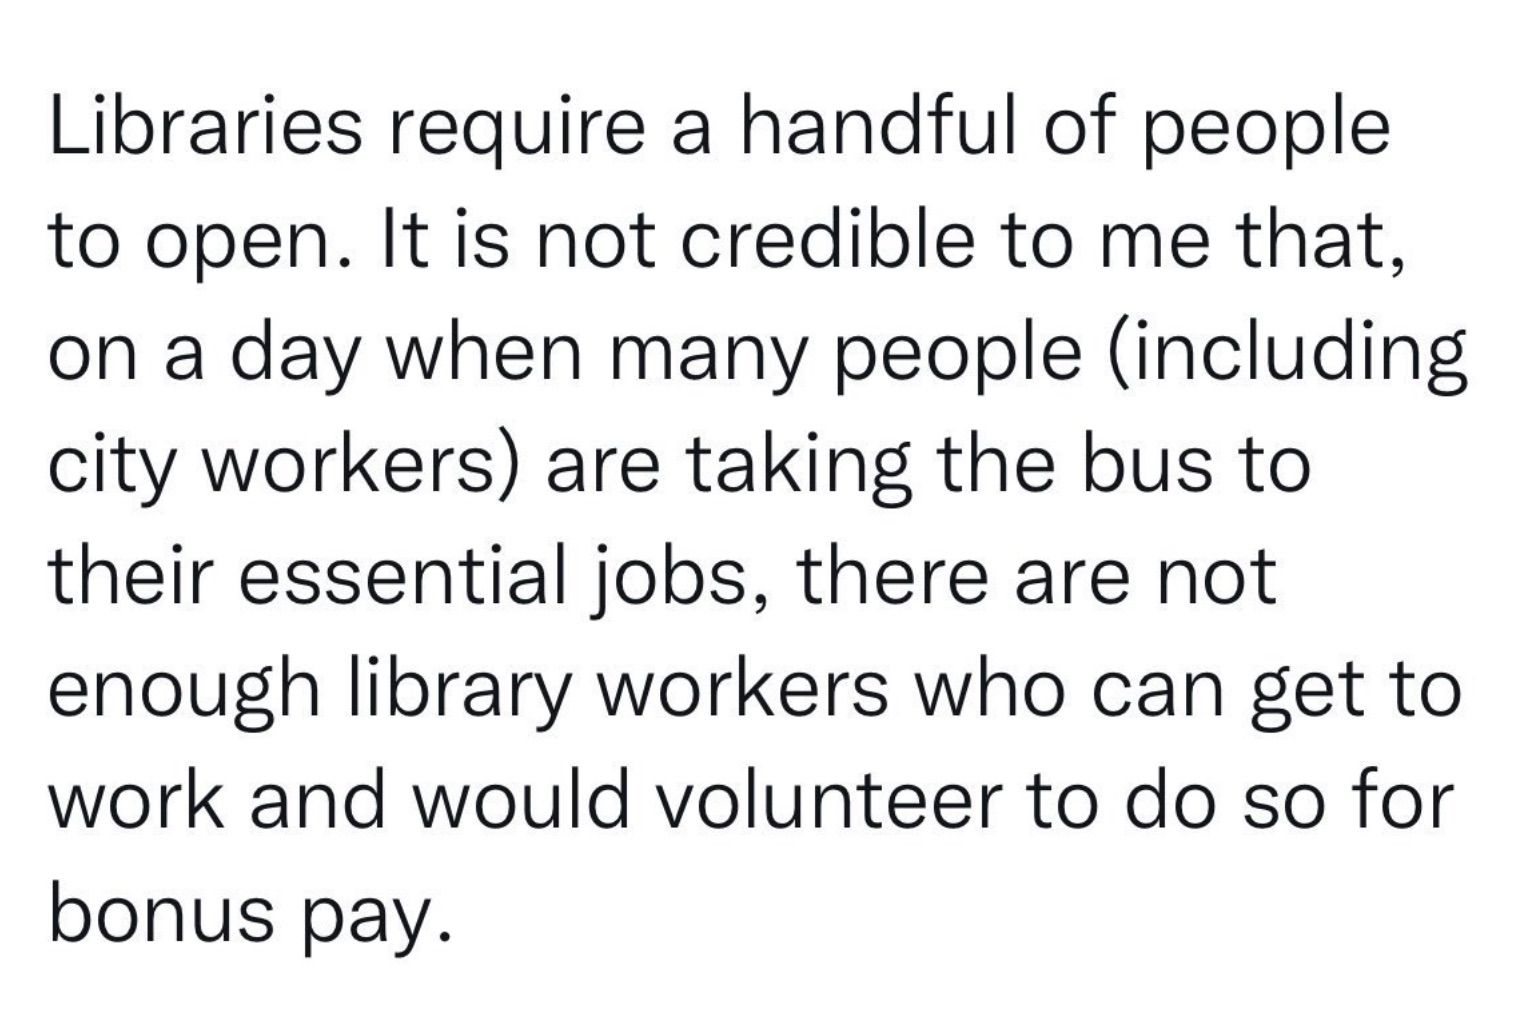 Screen shot of a tweet that reads "libraries require a handful of people to open. it is not credible to me that, on a day when many people (including city workers) are taking the bus to their essential jobs, there are not enough library workers who can get to work and would volunteer to do so for bonus pay."